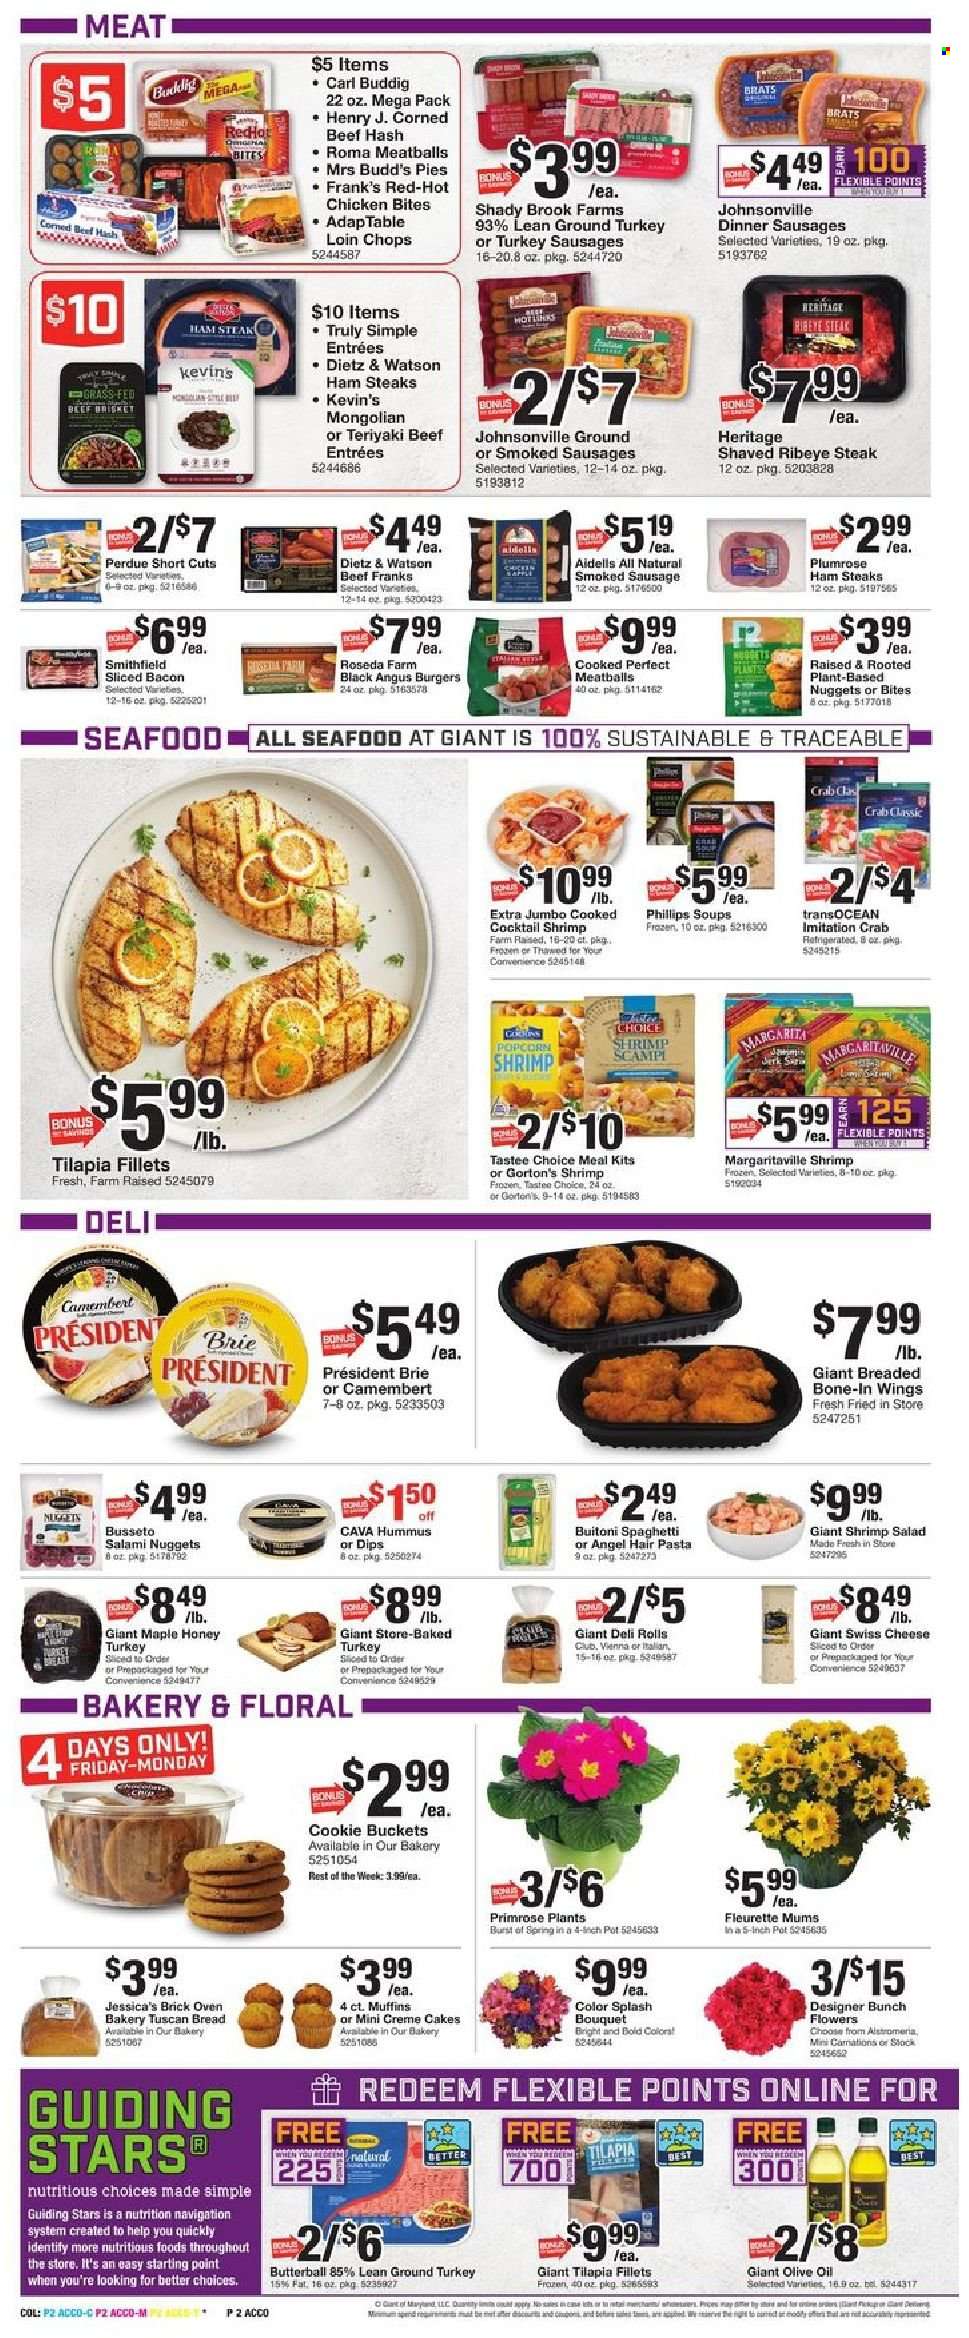 thumbnail - Giant Food Flyer - 01/14/2022 - 01/20/2022 - Sales products - cake, muffin, salad, tilapia, seafood, crab, shrimps, Gorton's, beef hash, spaghetti, meatballs, nuggets, hamburger, pasta, Perdue®, Buitoni, bacon, Butterball, salami, ham, Johnsonville, Dietz & Watson, sausage, smoked sausage, hummus, corned beef, ham steaks, camembert, swiss cheese, cheese, brie, Président, chicken bites, olive oil, oil, honey, L'Or, TRULY, ground turkey, beef meat, beef steak, steak, ribeye steak, beef brisket, pot, bouquet, primroses. Page 2.